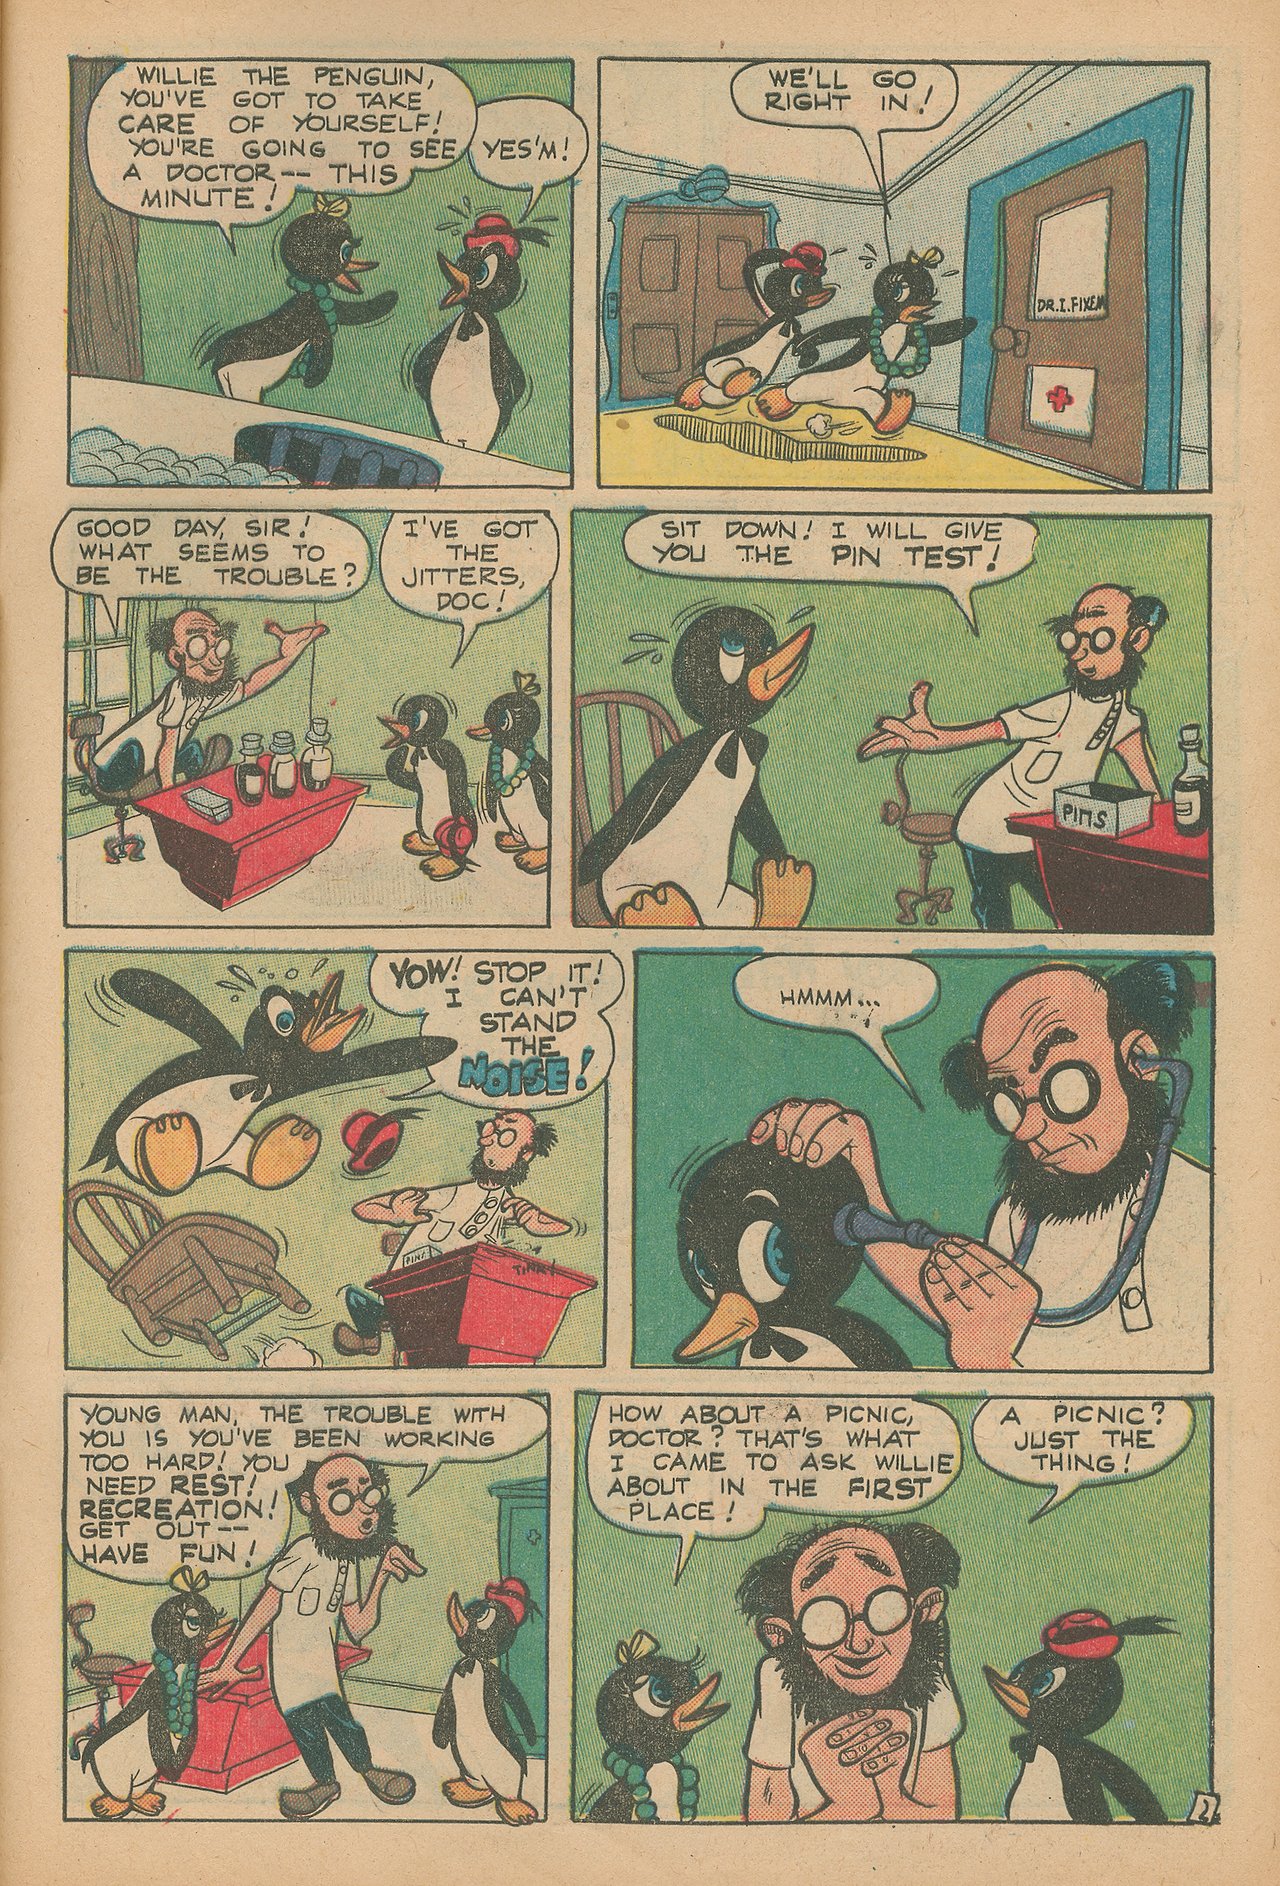 Read online Willie The Penguin comic -  Issue #3 - 29